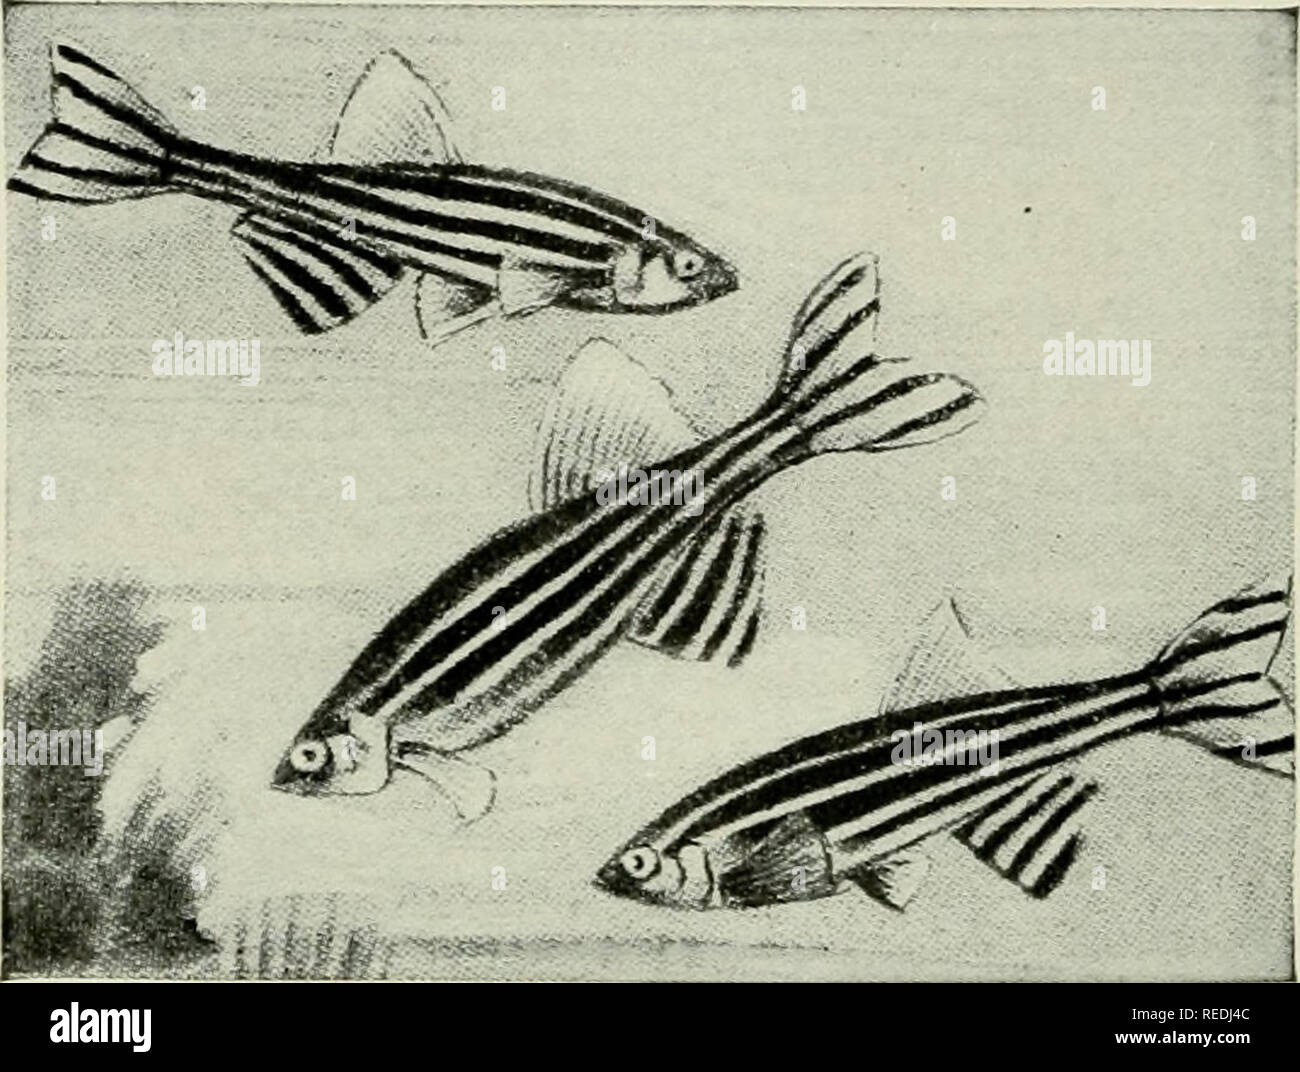 . The complete aquarium book; the care and breeding of goldfish and tropical fishes. Aquariums; Goldfish. 1-* Fig. 276. Brachydanio nigrojasciatus Slightly smaller than rerio and not quite so brilliant. Below the two lateral stripes is a line of dark dots. Although the life habits are the same as rerio, it is more difficult to propagate. They are found in Burma.. Fig. 277. Brachydanio rerio (Known as Danio rerio J [Life size] A moderate-sized aquarium, containing a number of Brachydanio rerios in a good light, makes a beautiful picture. Their steel-blue stripes, alternating with white and carr Stock Photo